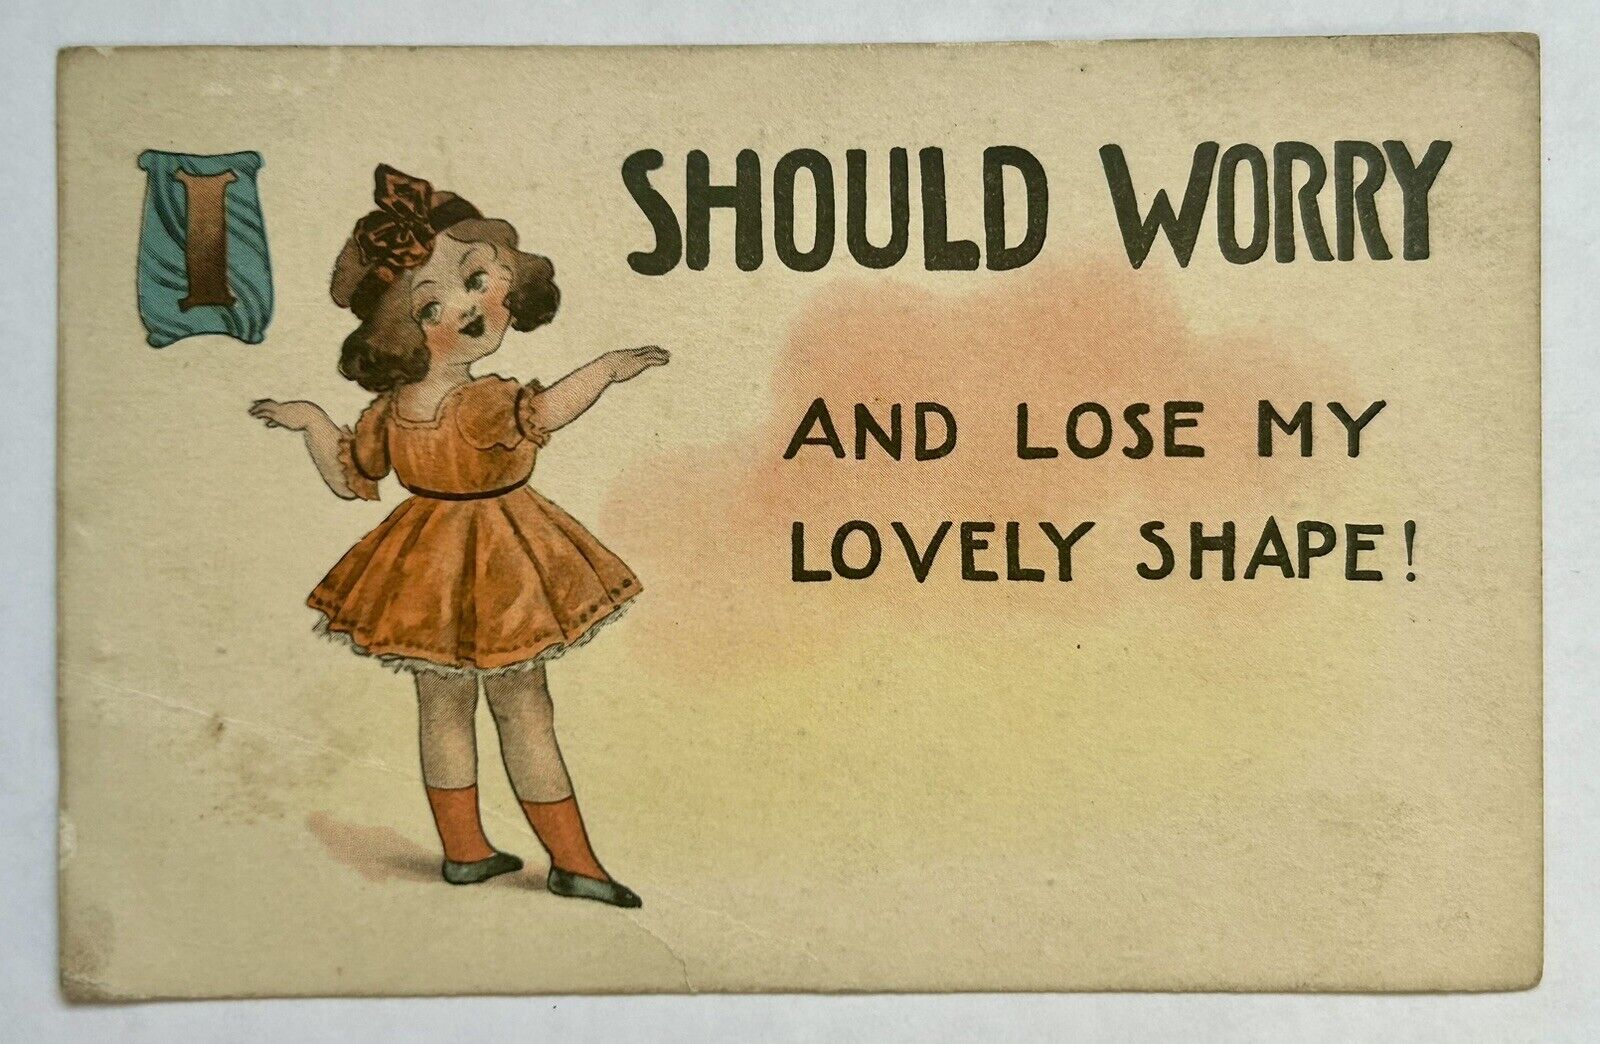 I should worry and lose my lovely shape 1915 vintage funny postcard